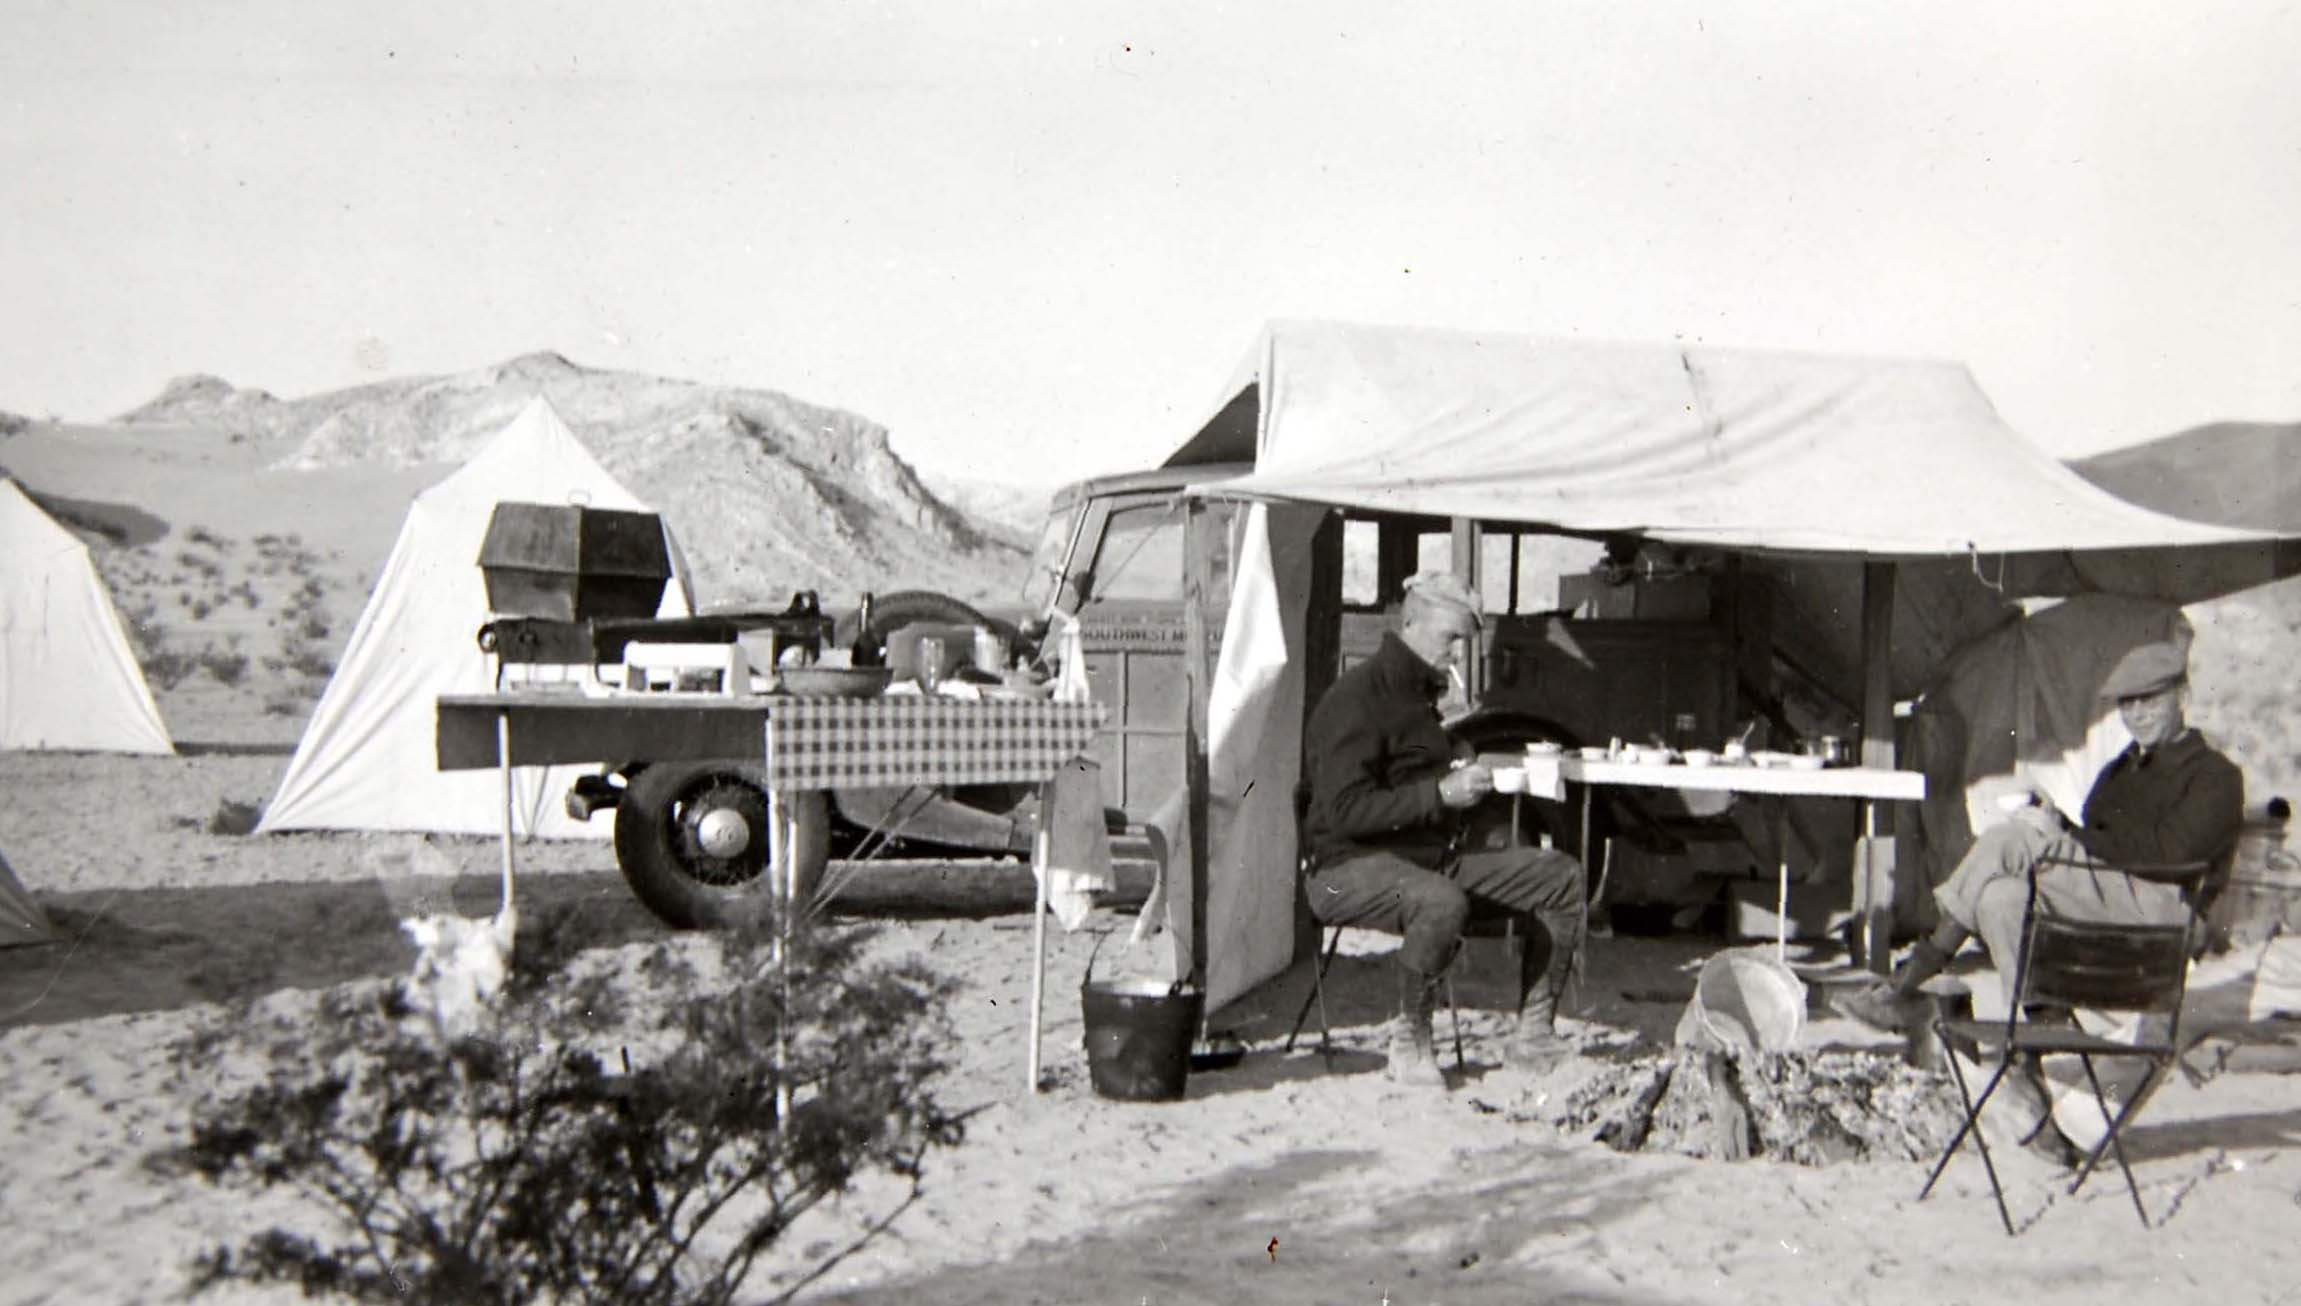 Temote expedition camp